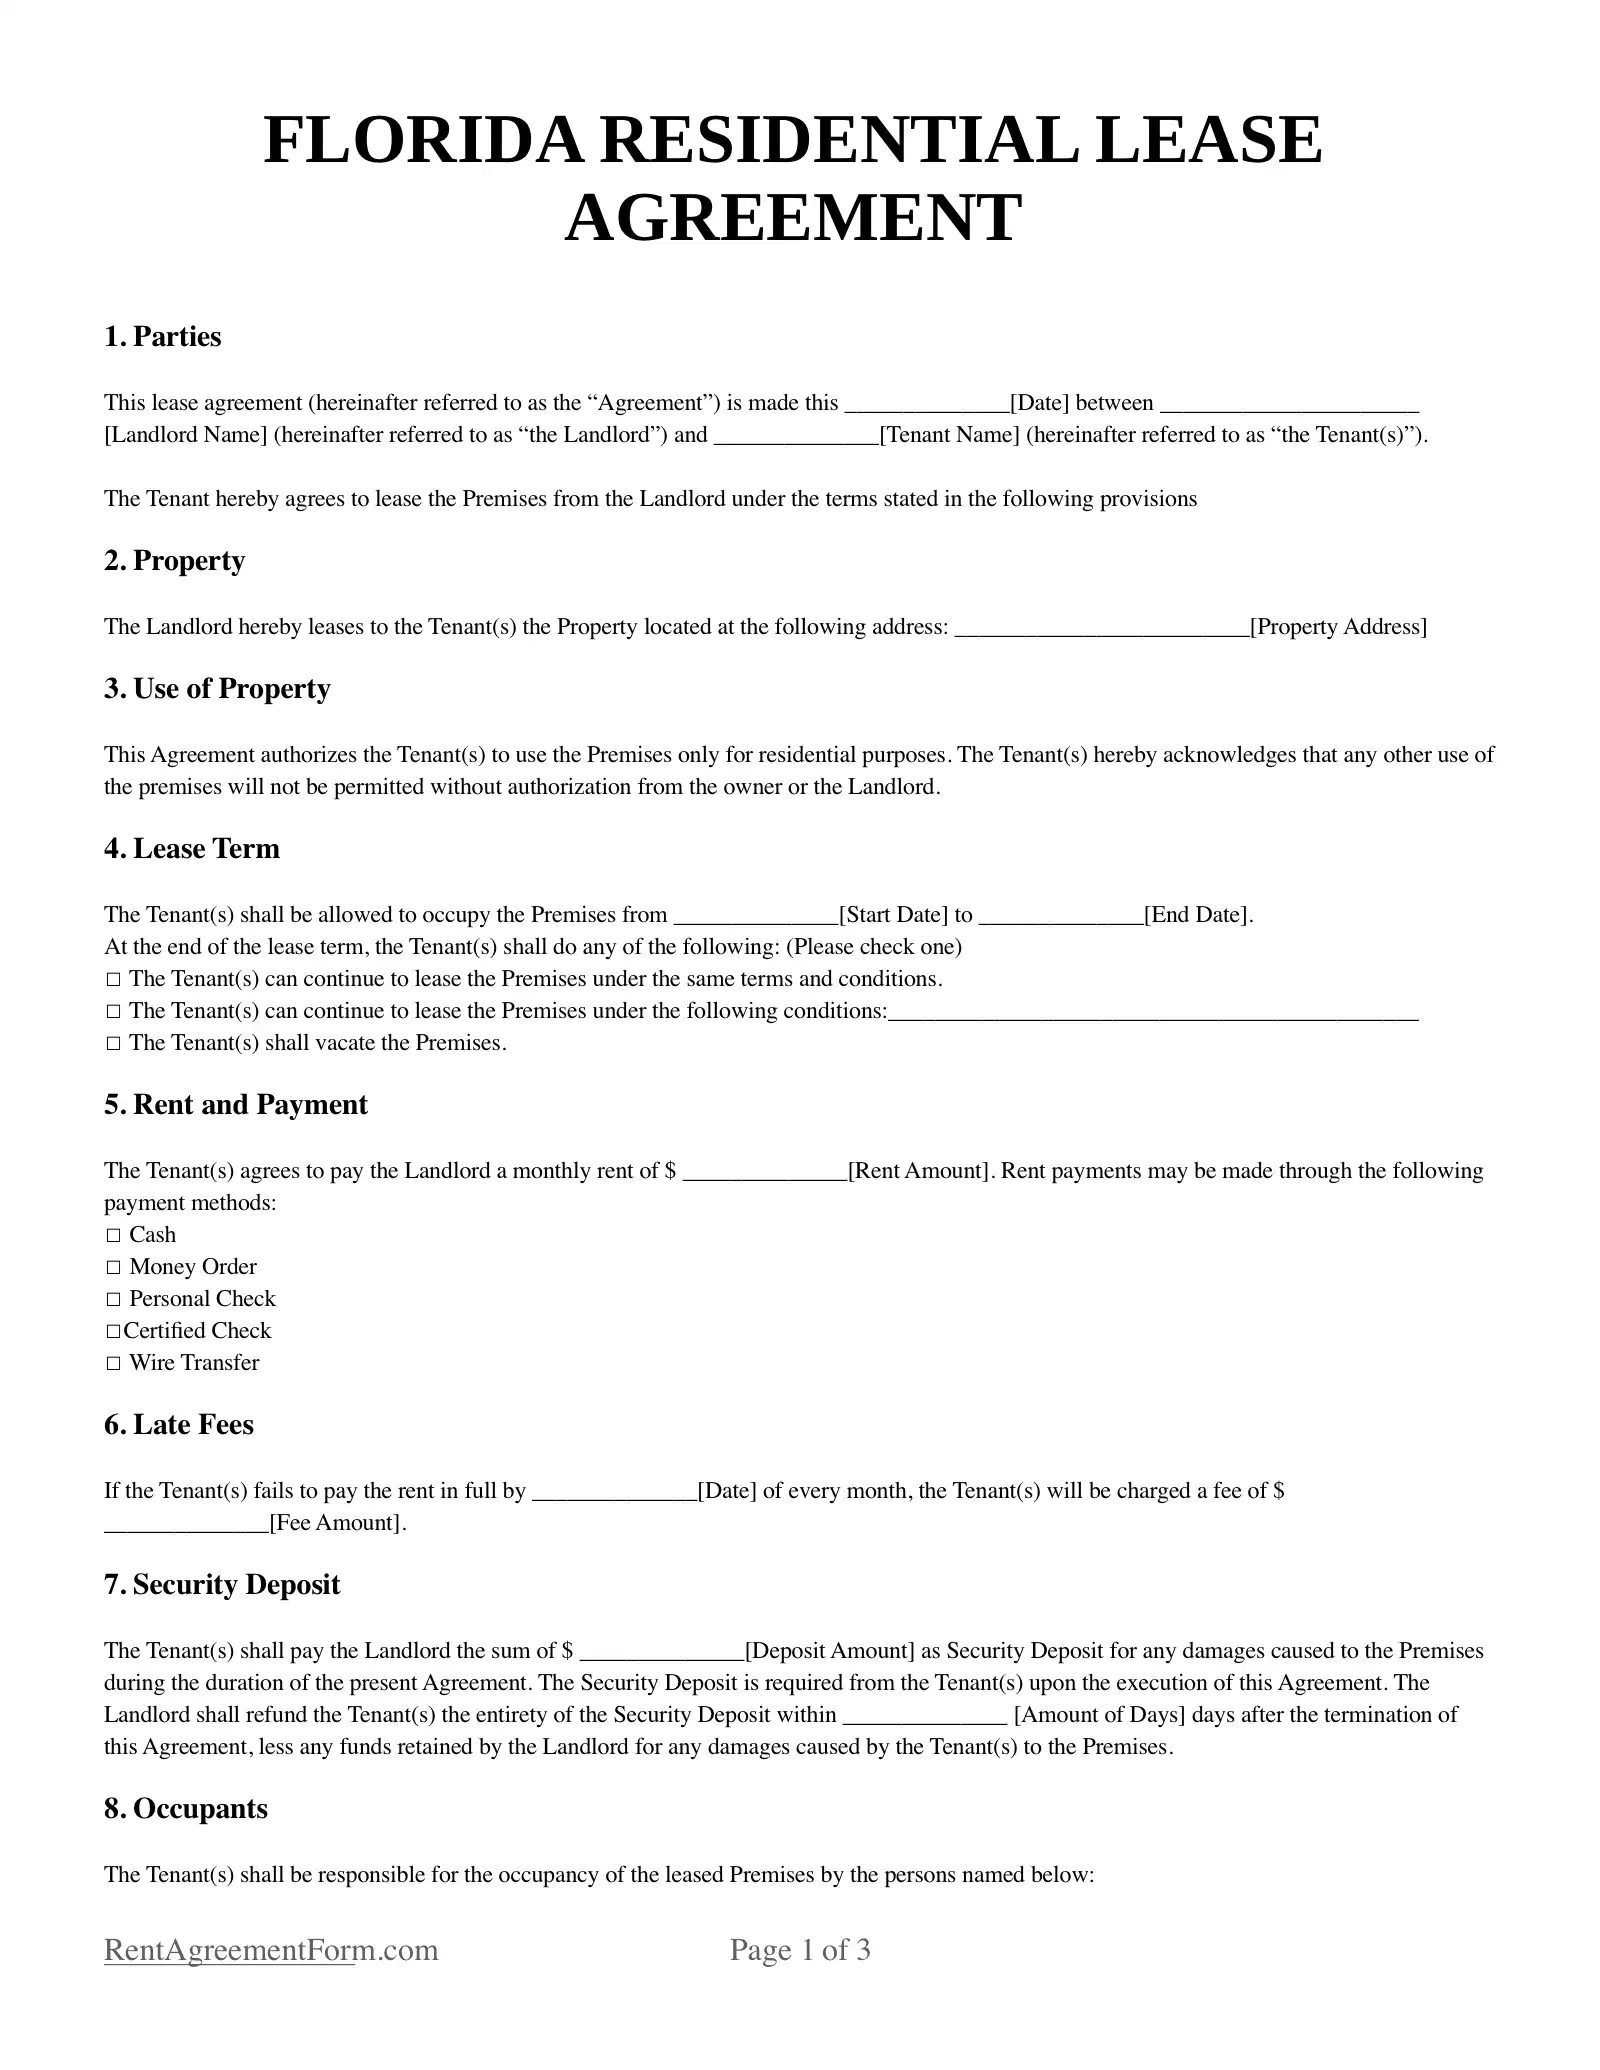 Florida Residential Lease Agreement Sample